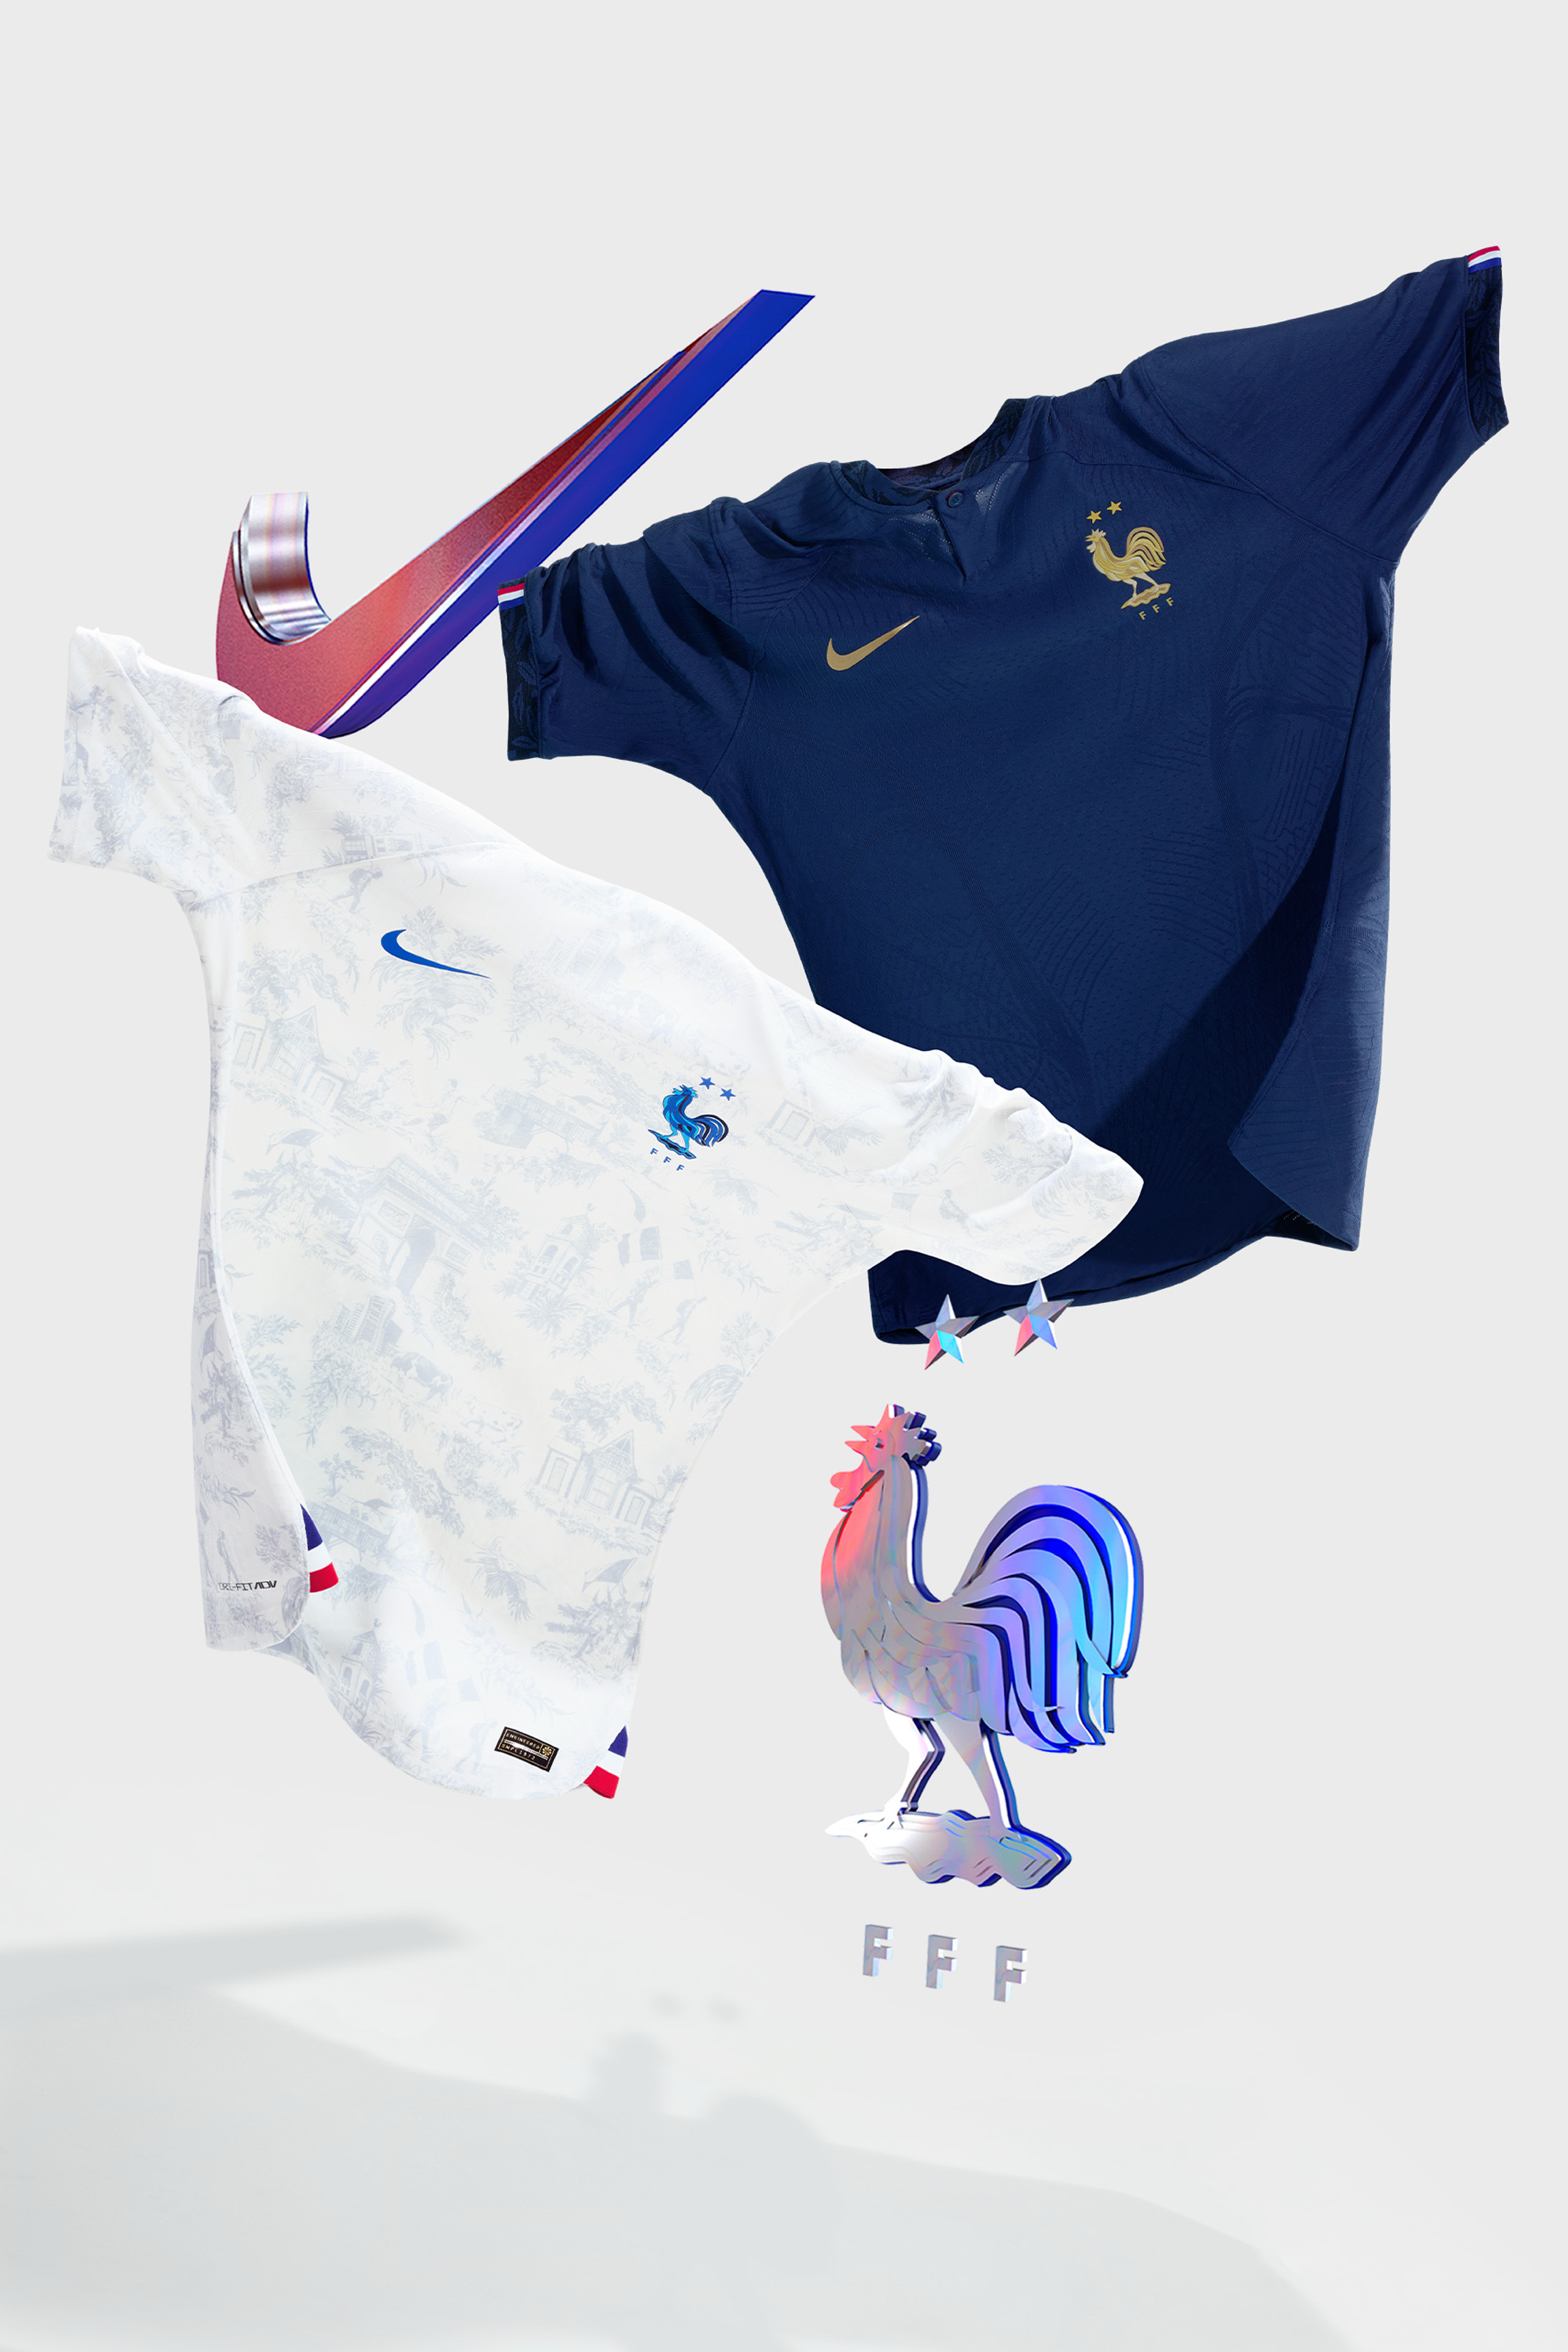 nike-2022-national-team-football-kits-collections-france-jersey_632737473810c.jpg